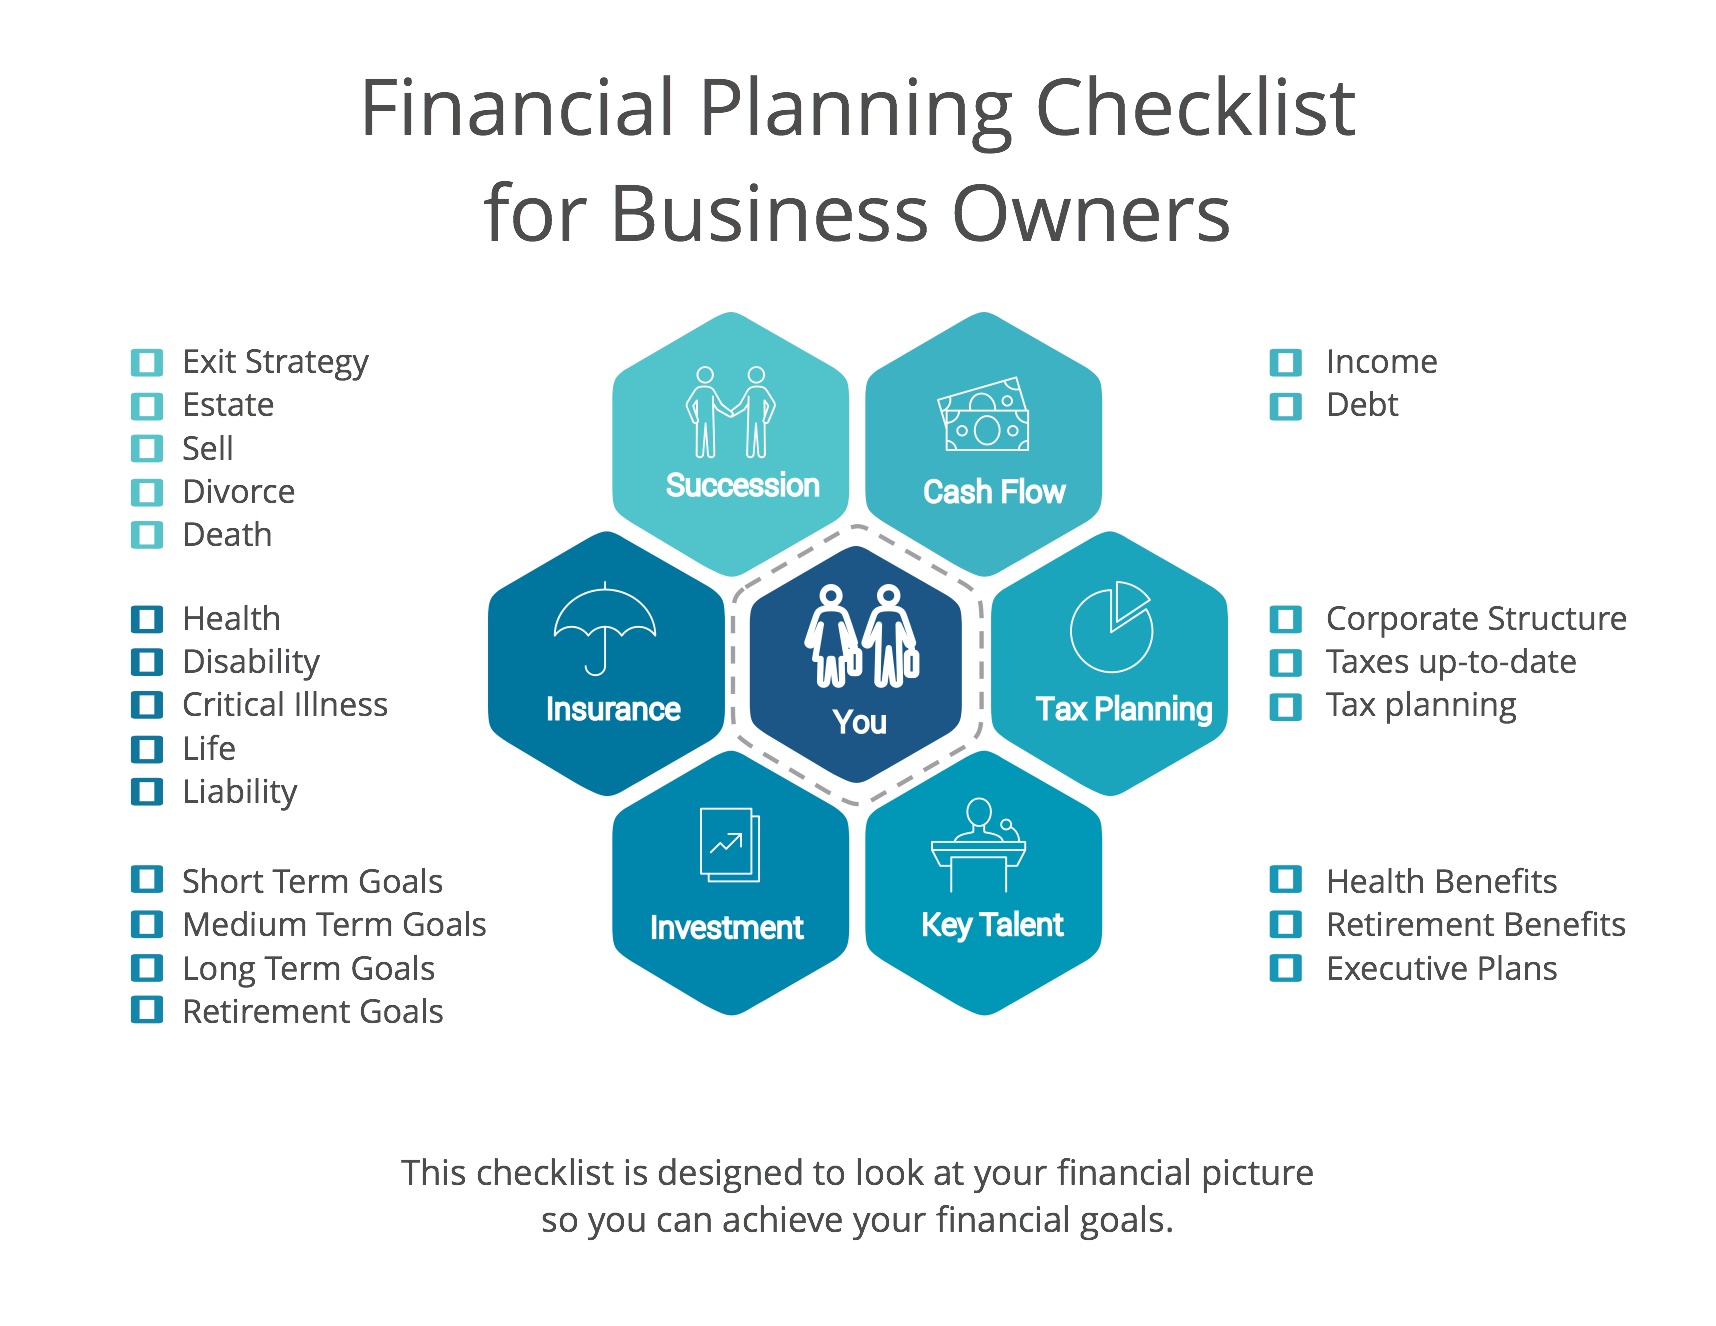 how to build financial planning business